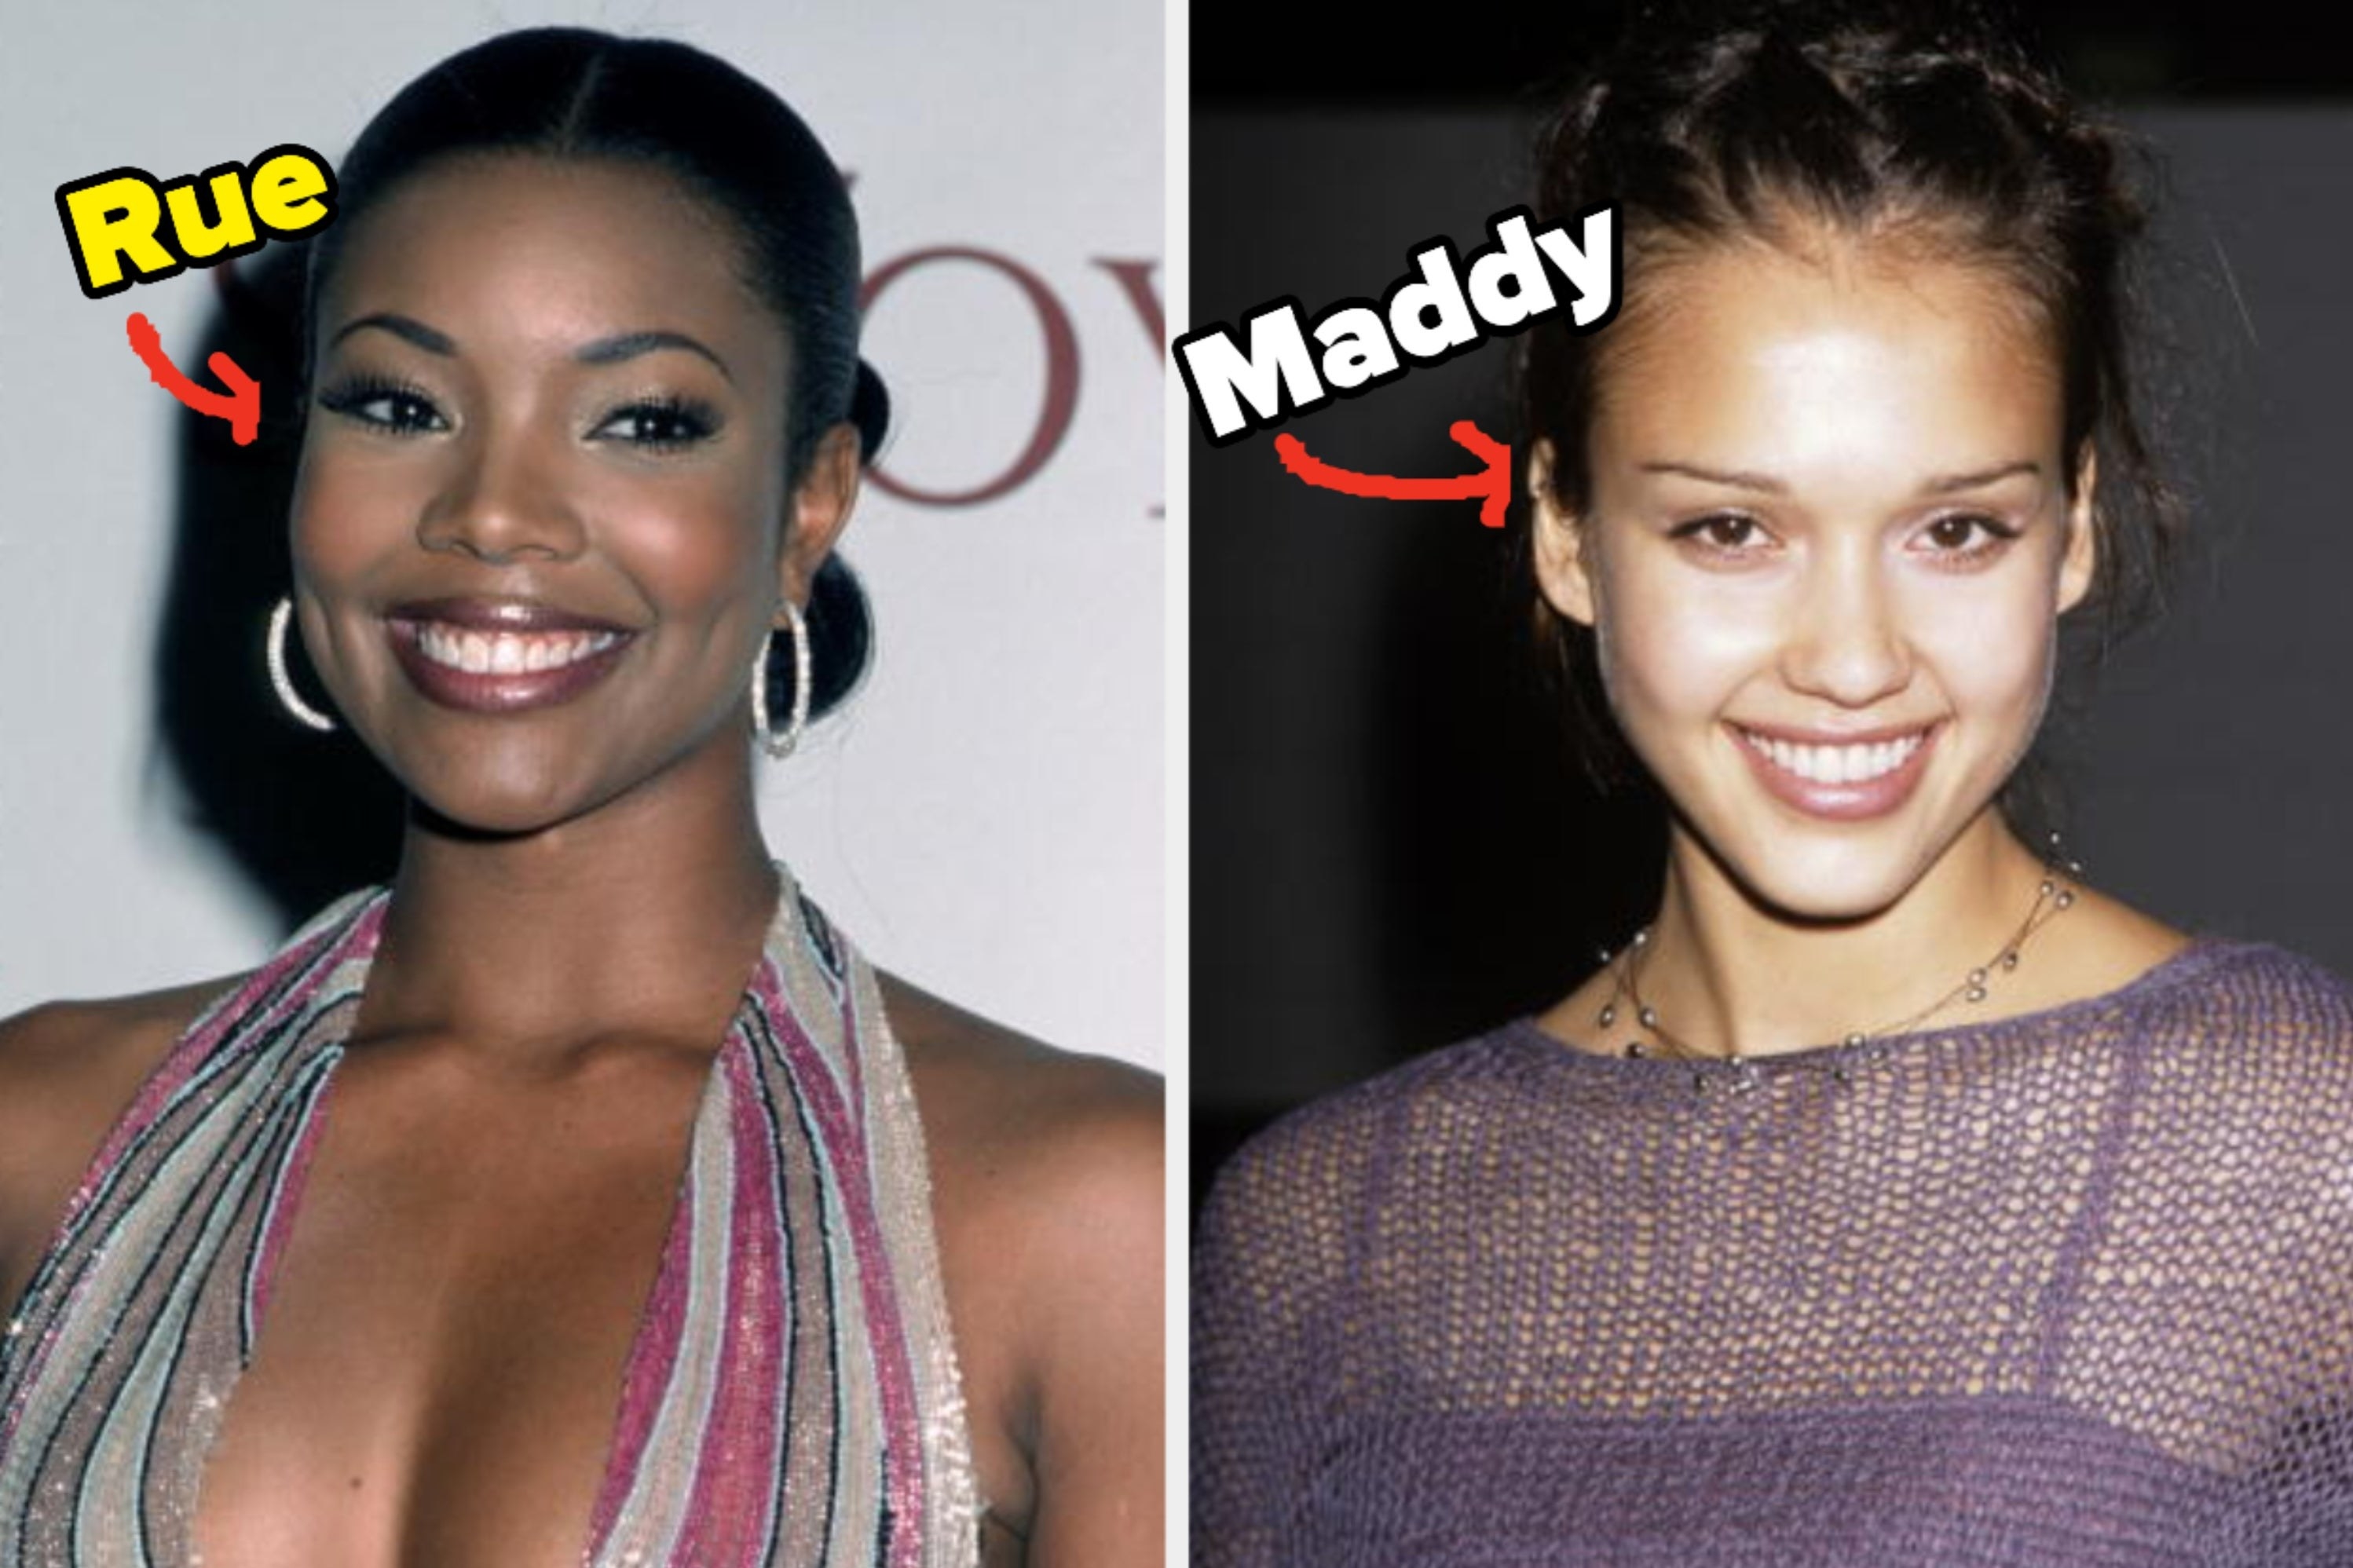 On the left: photo of Gabrielle Union and arrow reading &quot;Rue&quot;. On the right: photo of Jessica Alba and arrow reading &quot;Maddy&quot;.